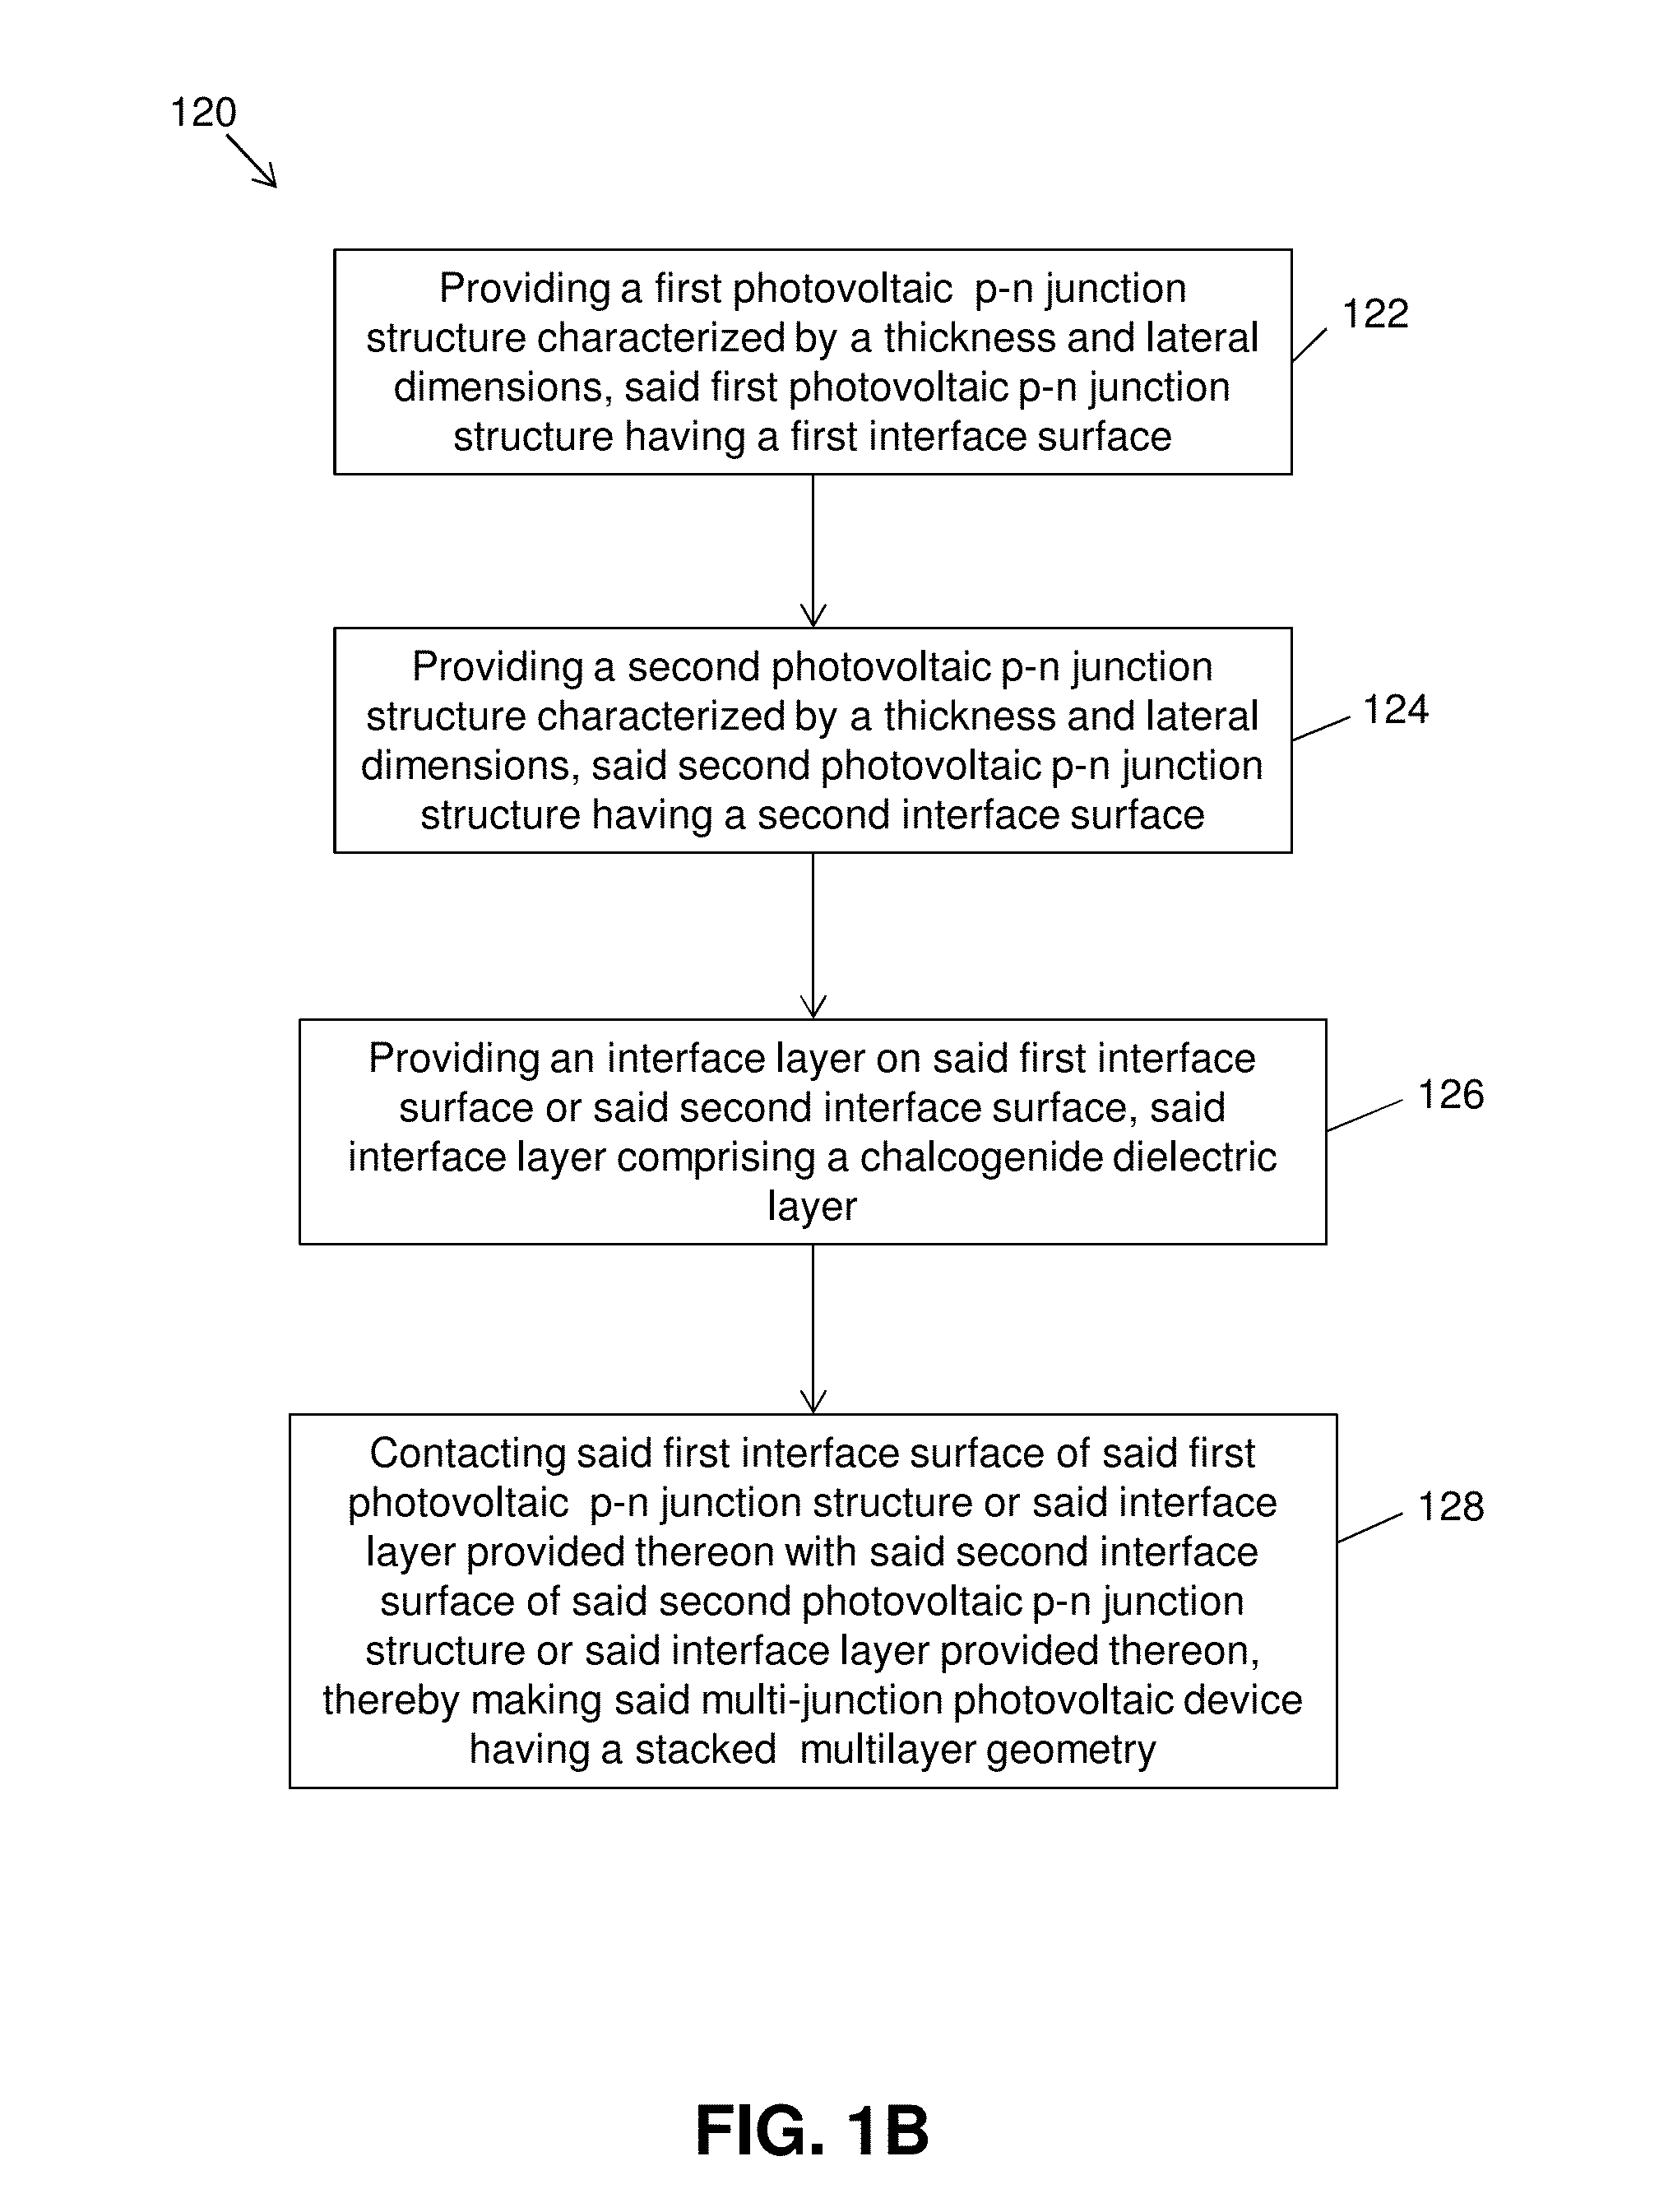 Printing-based assembly of multi-junction, multi-terminal photovoltaic devices and related methods